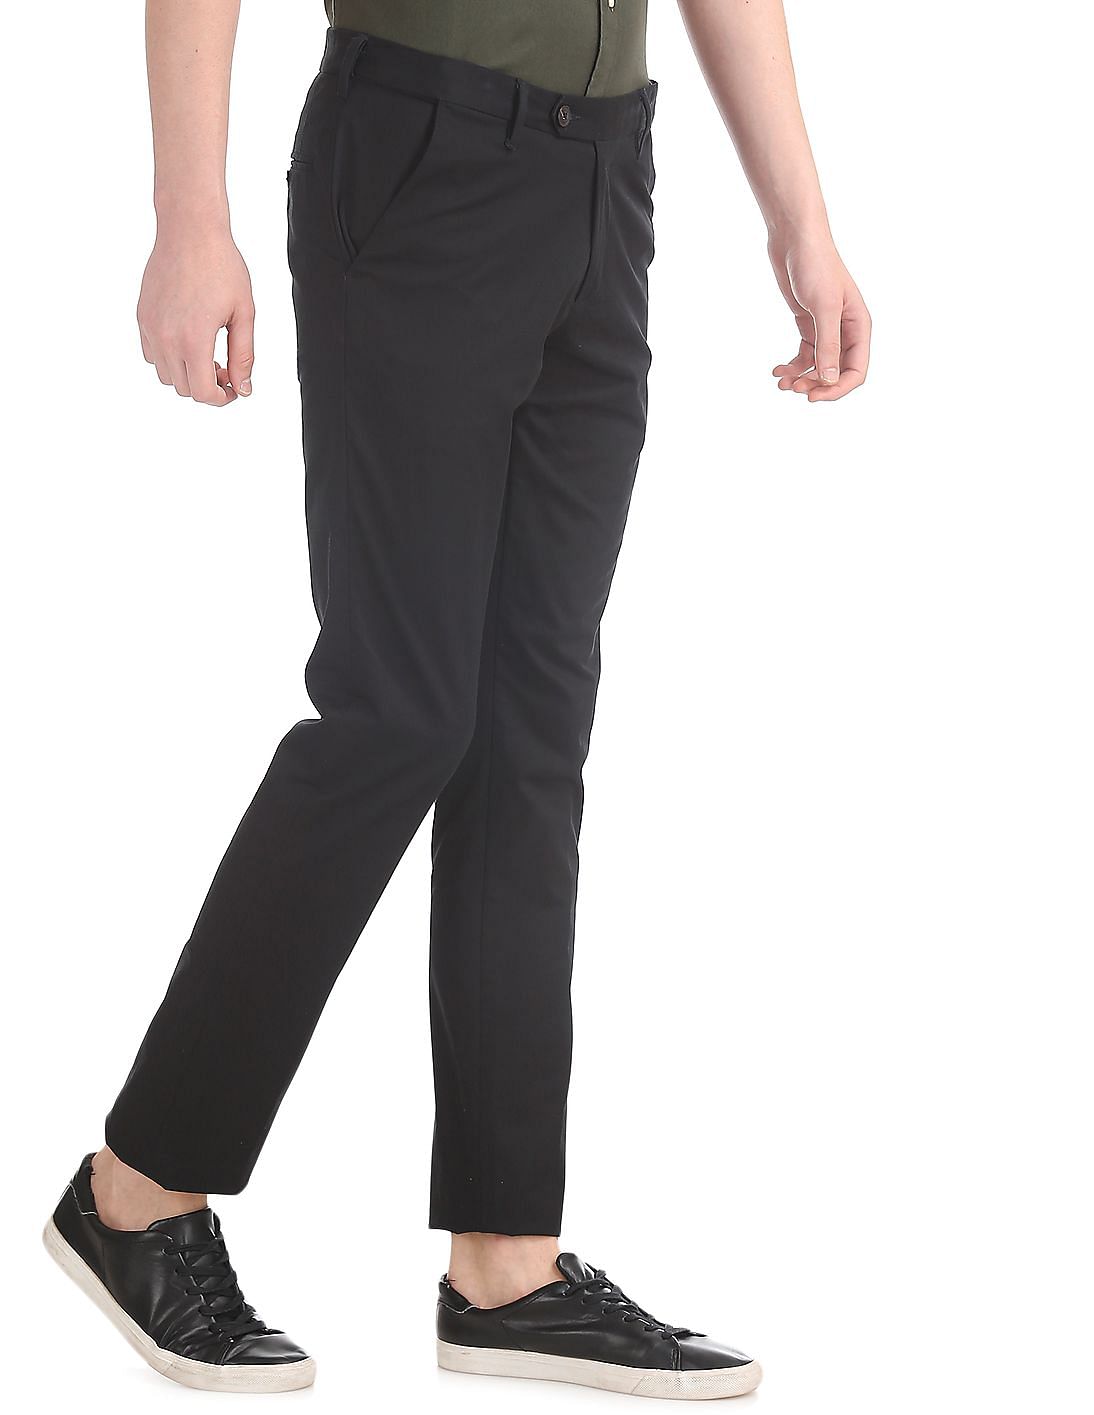 Buy Men Black Tailored Regular Fit Solid Trousers online at NNNOW.com